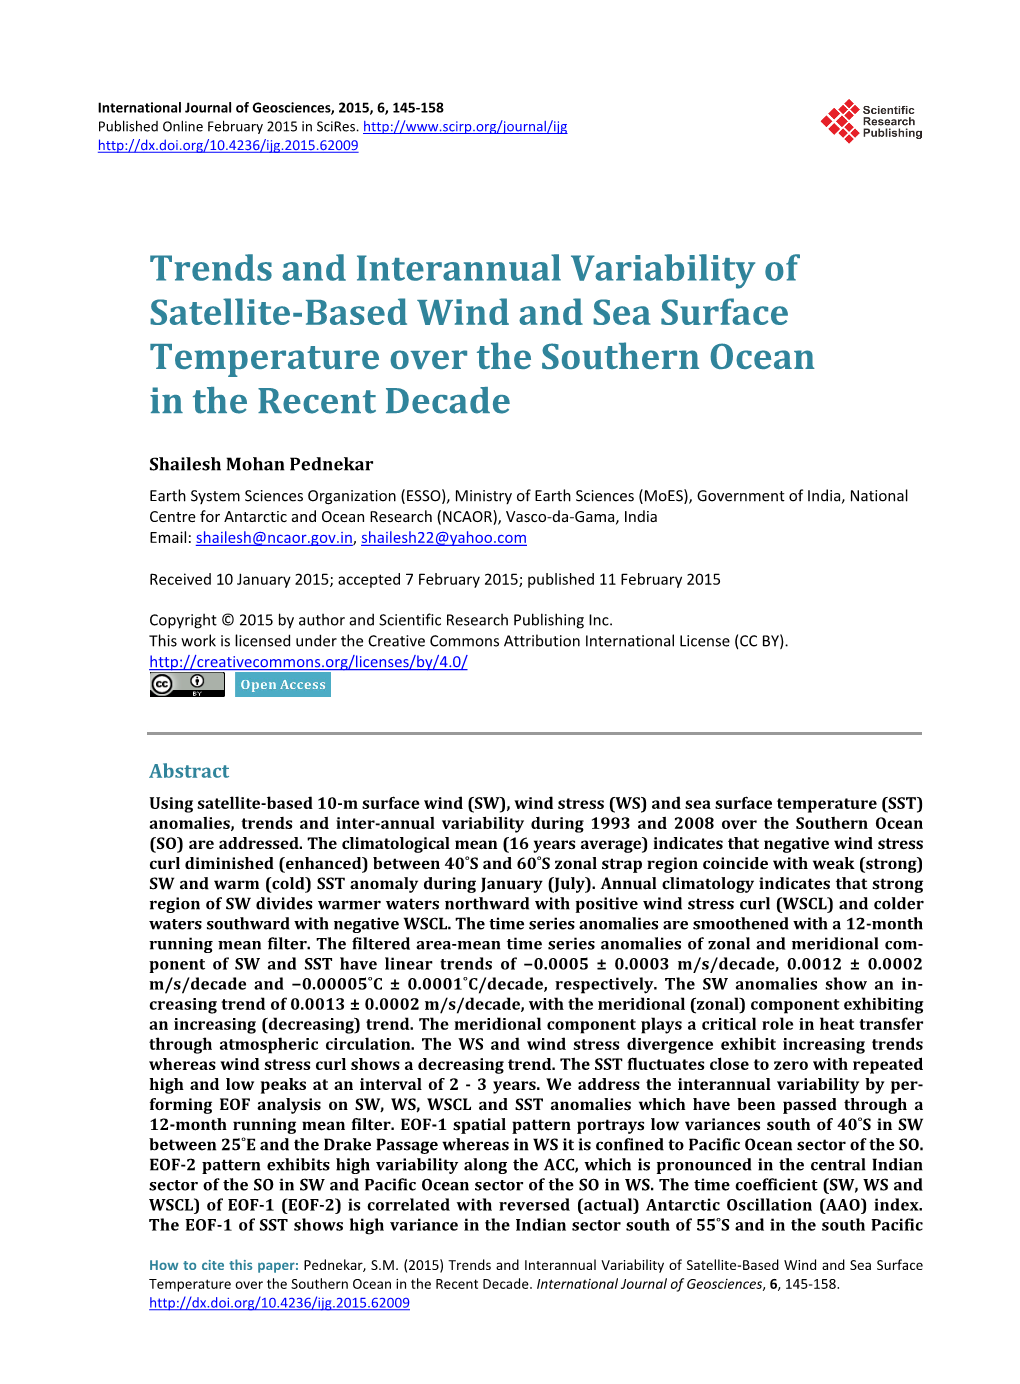 Trends and Interannual Variability of Satellite-Based Wind and Sea Surface Temperature Over the Southern Ocean in the Recent Decade